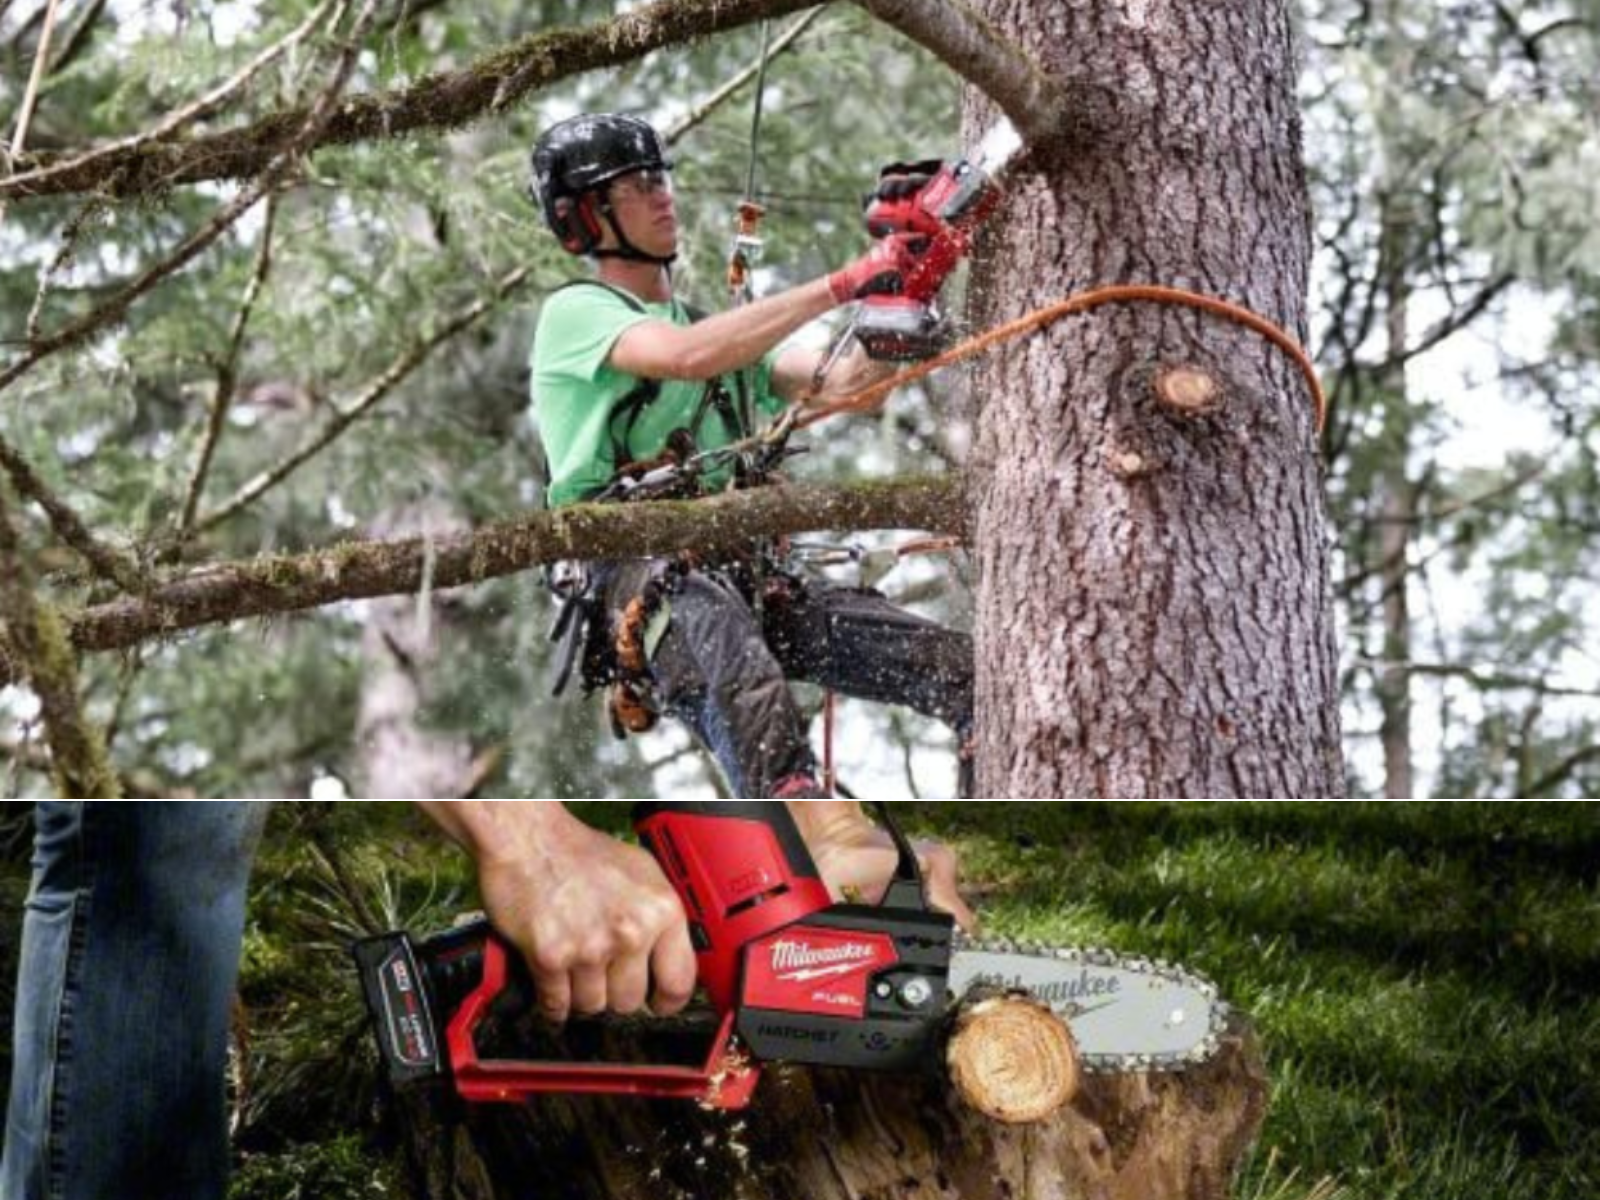 A man tied off trimming limbs from a tree, and another cutting up a small tree with his Milwaukee chainsaw.